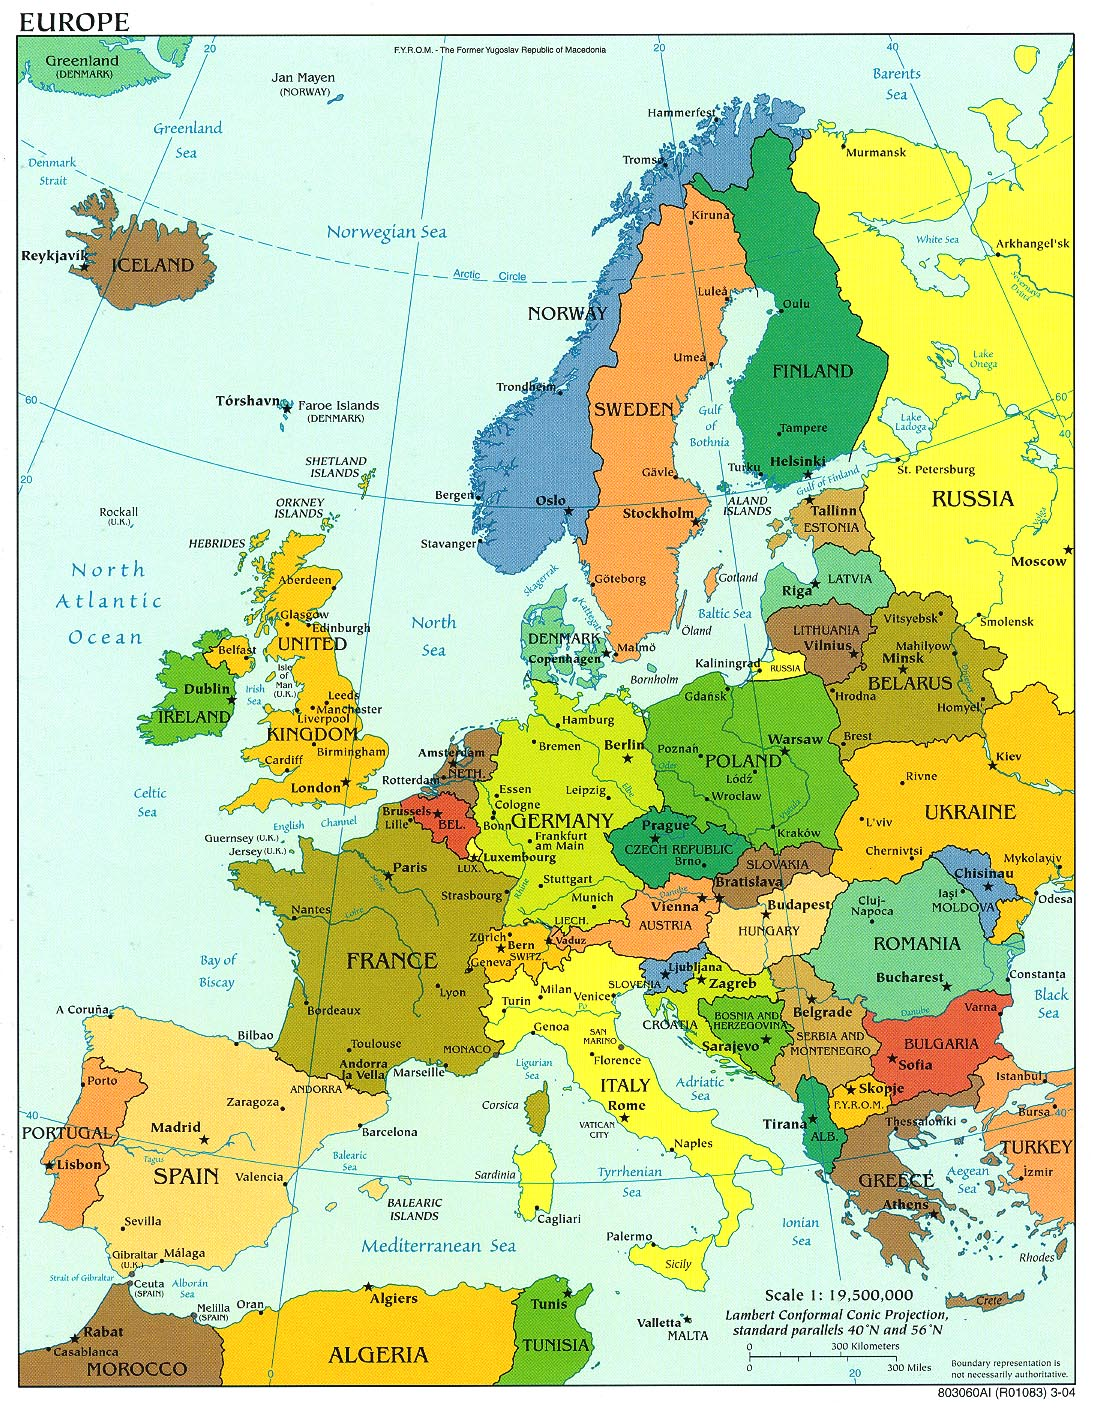 [map of Europe]